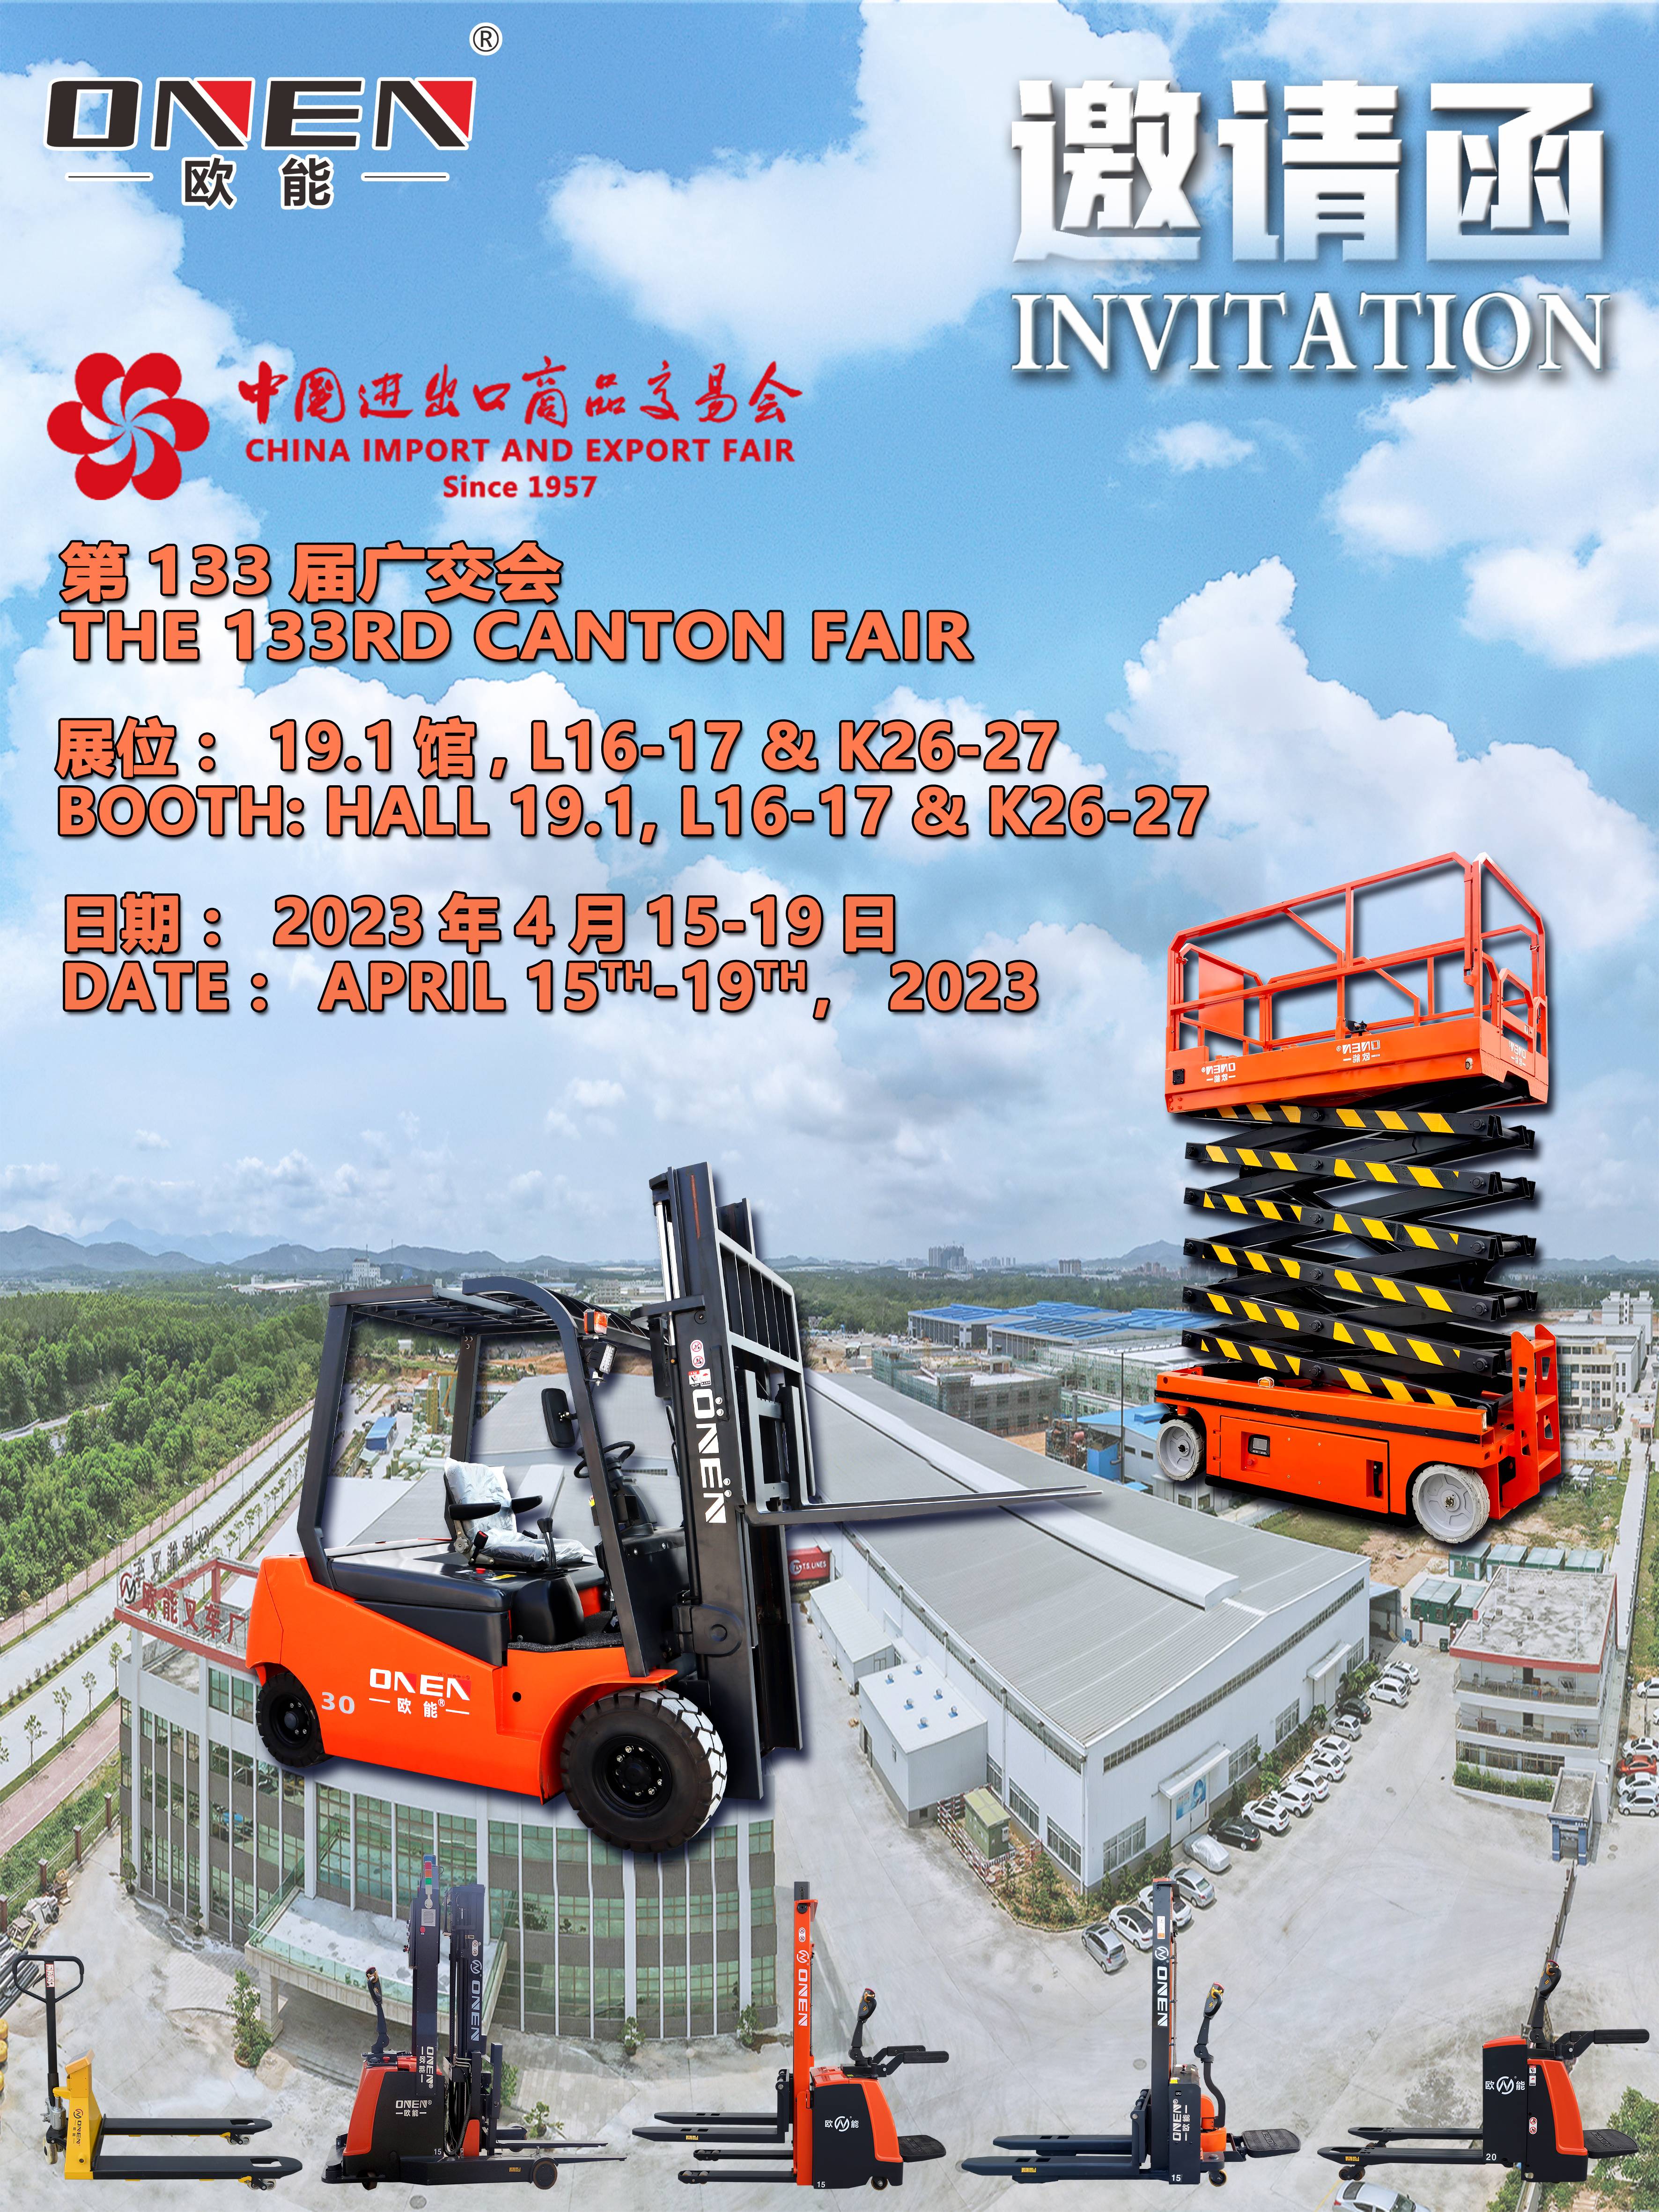 ONEN Sincerely Invite You To Join us For The 133rd Canton Fair